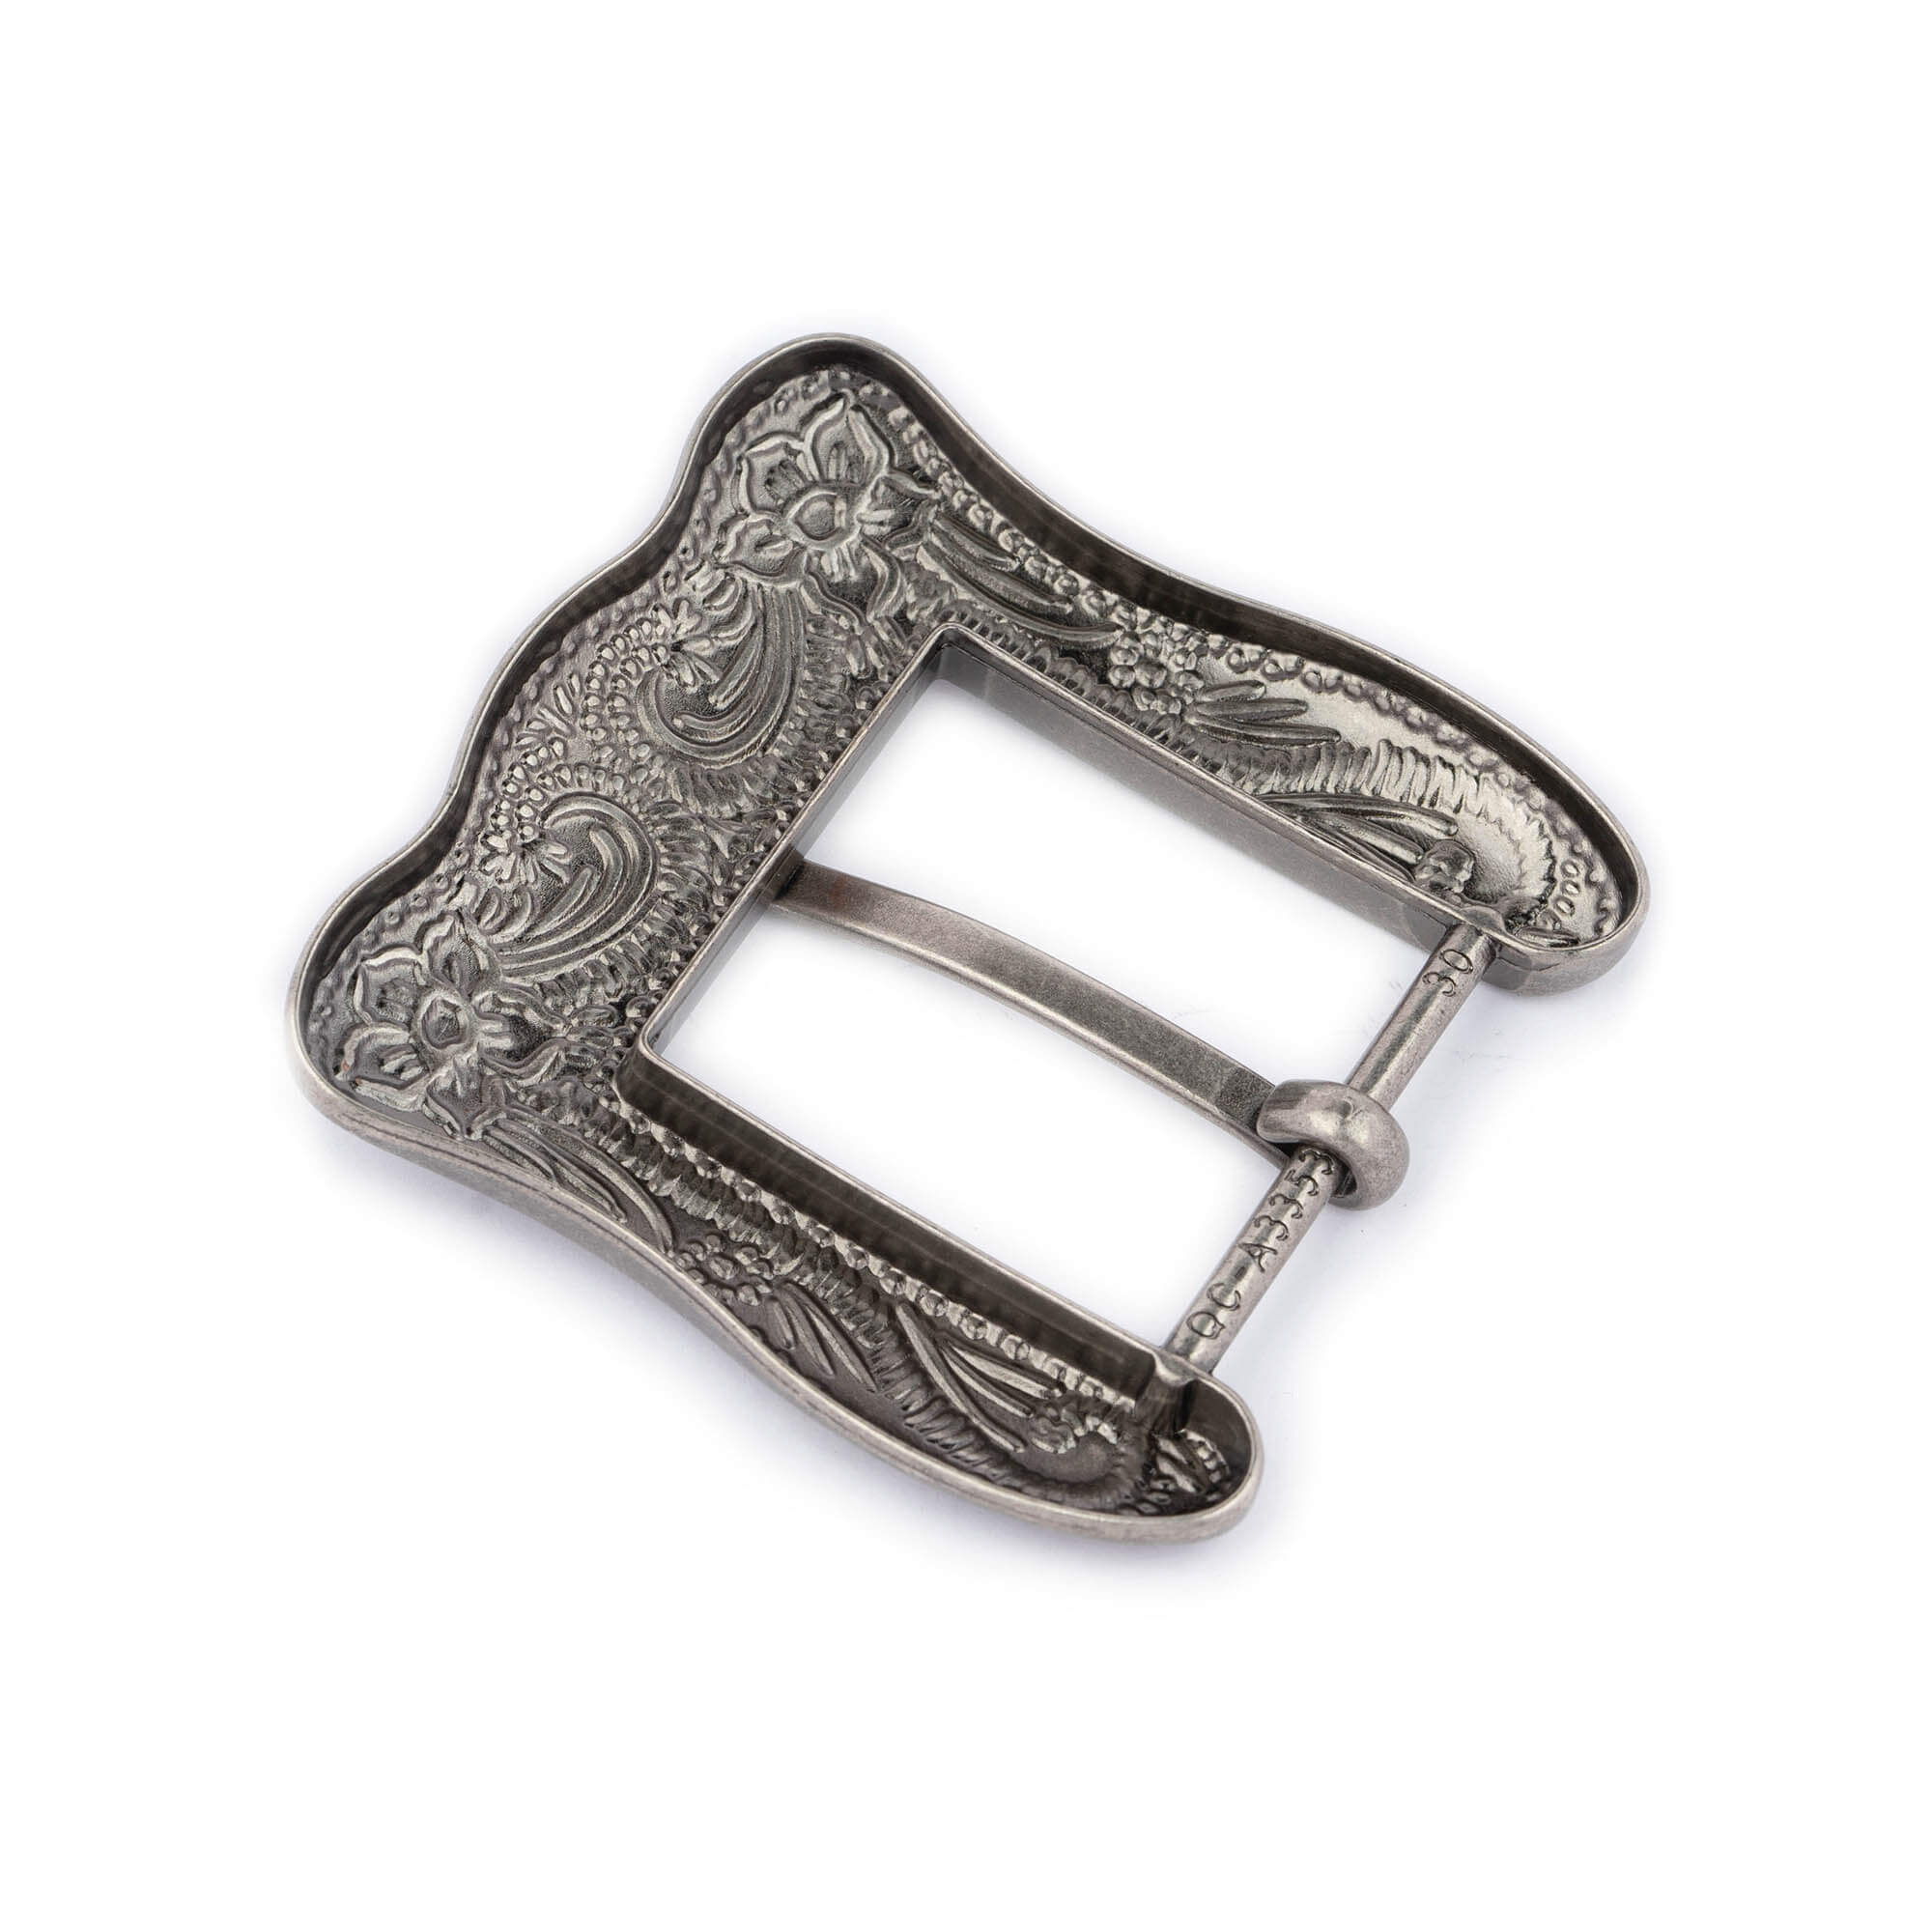 1.25 inch Square Silver Belt Buckle